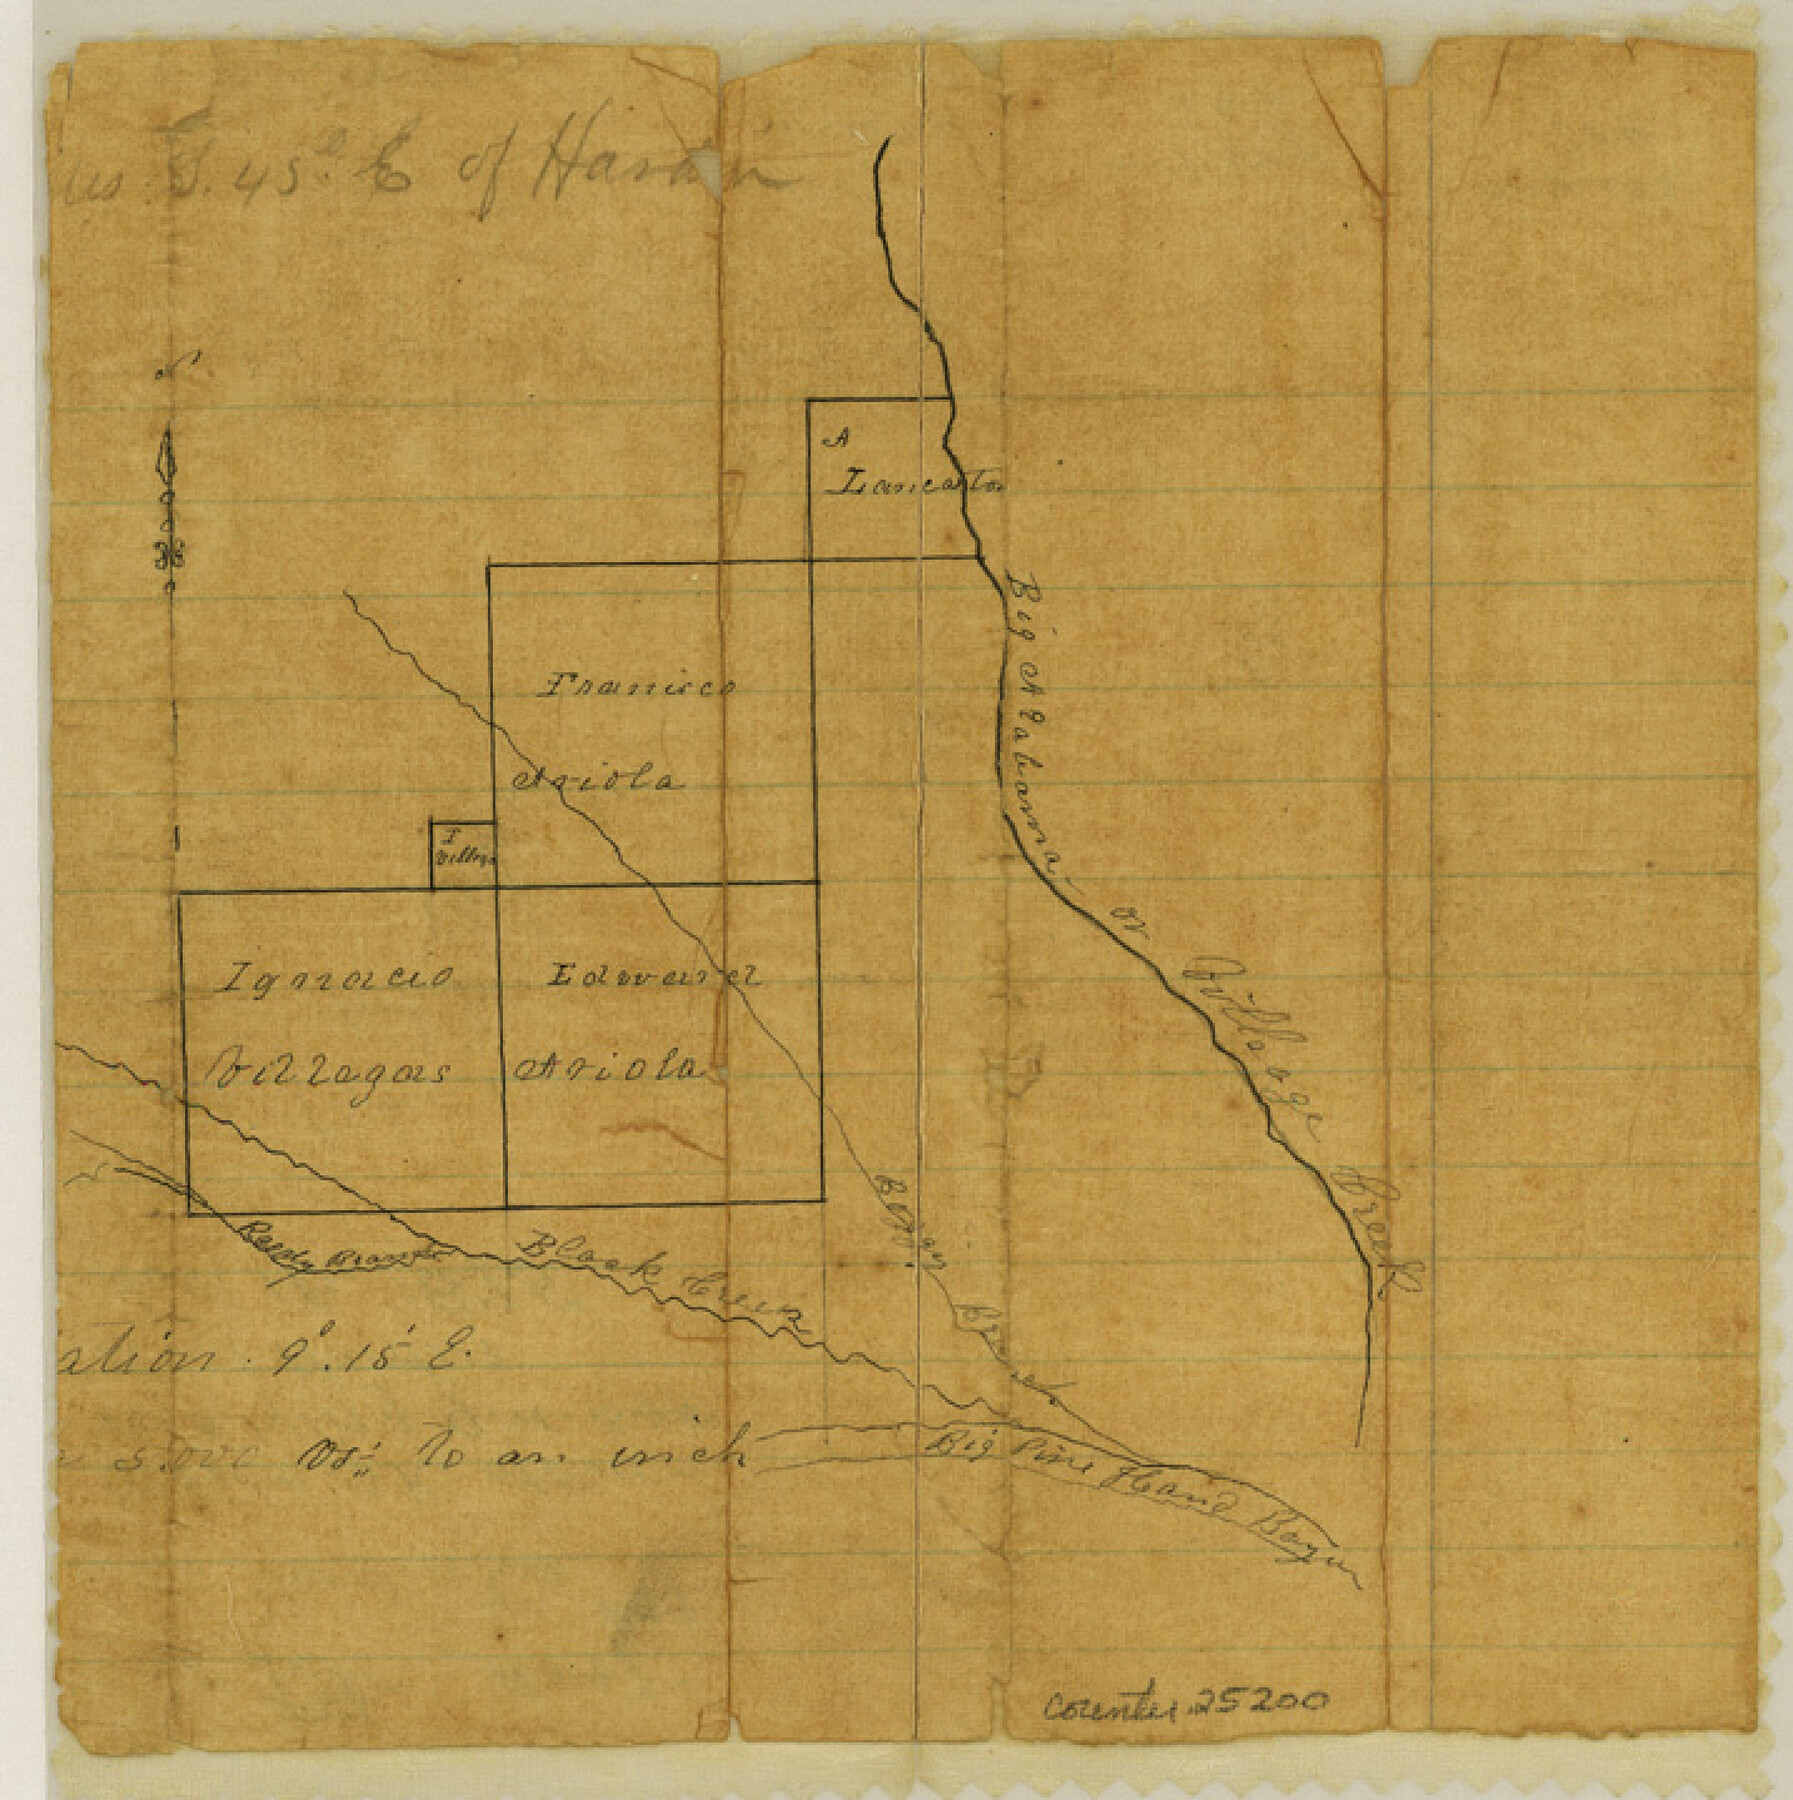 25200, Hardin County Sketch File 47, General Map Collection